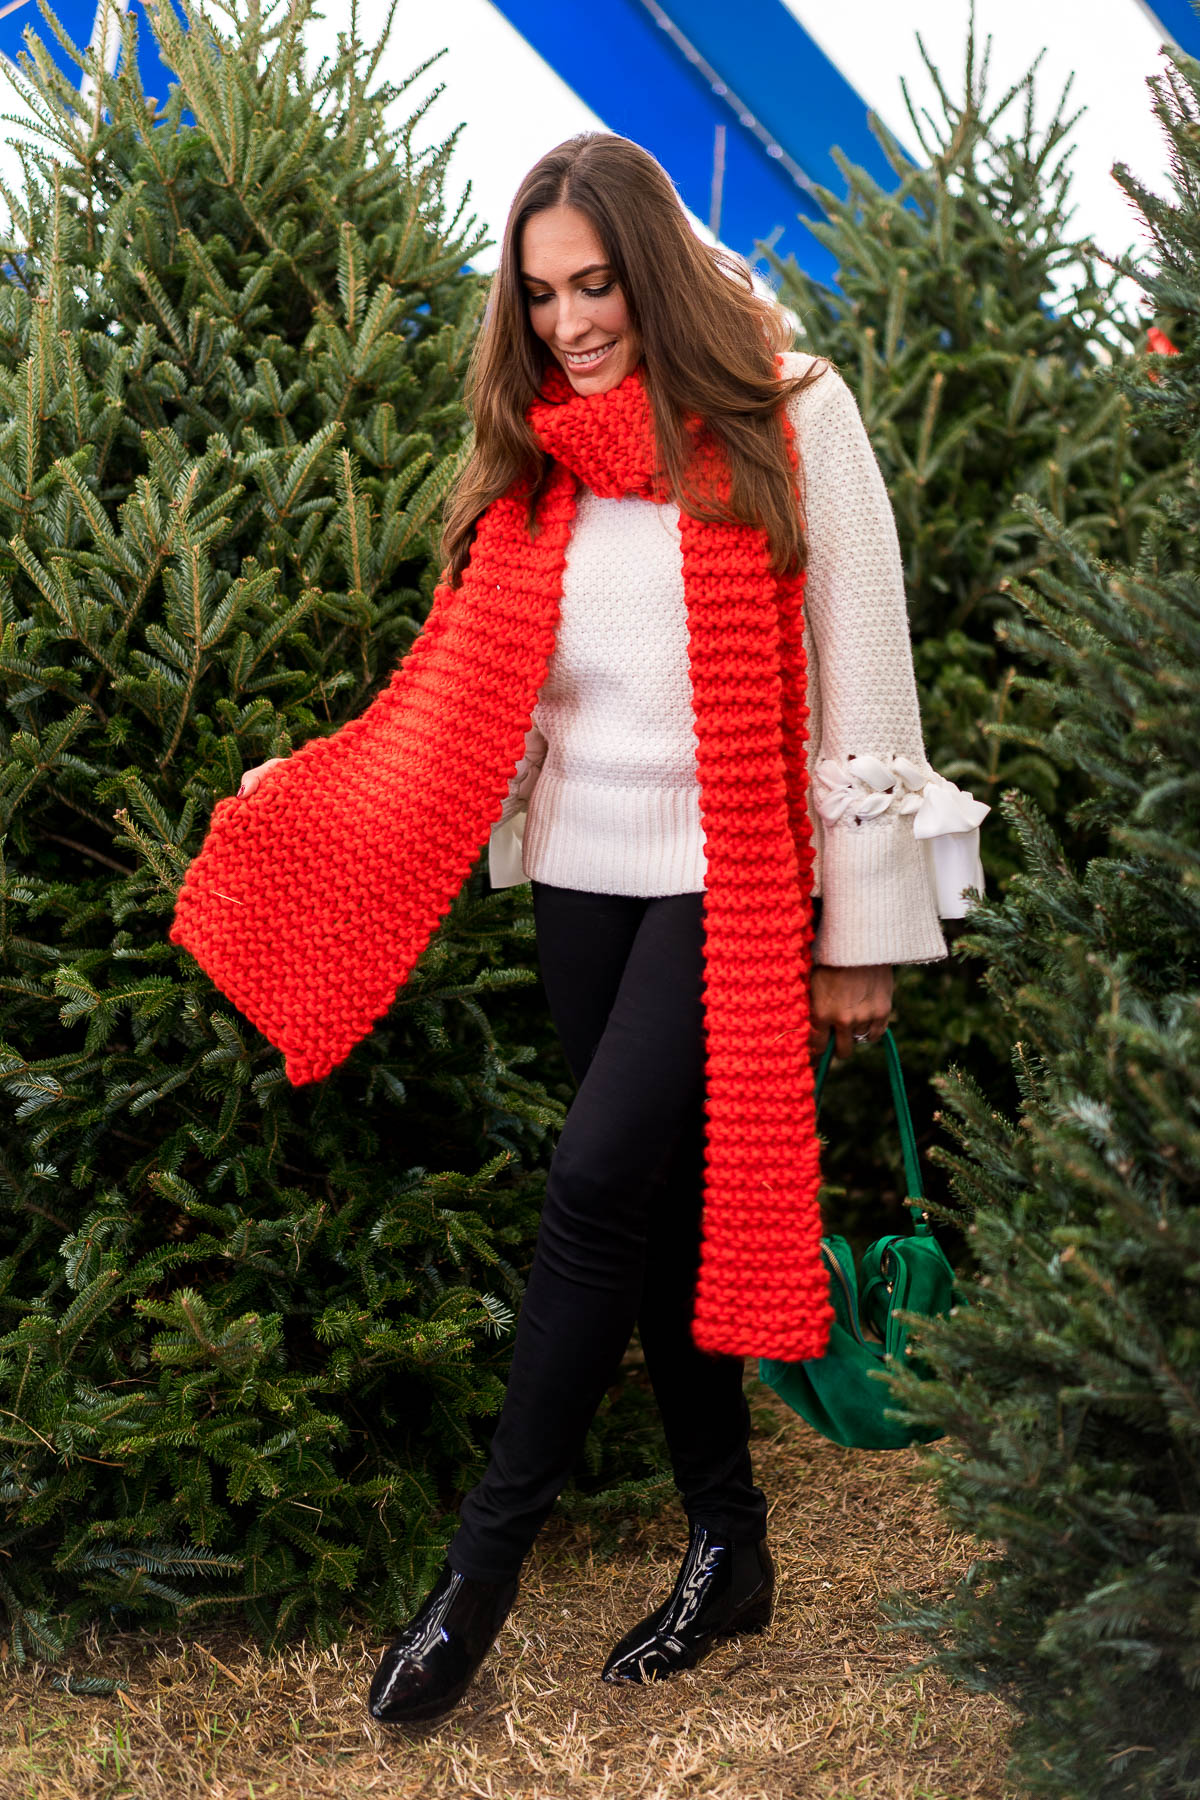 Amanda from A Glam Lifestyle fashion blogger wears oversized red scarf with cream colored sweater to visit Christmas Trees Pompano